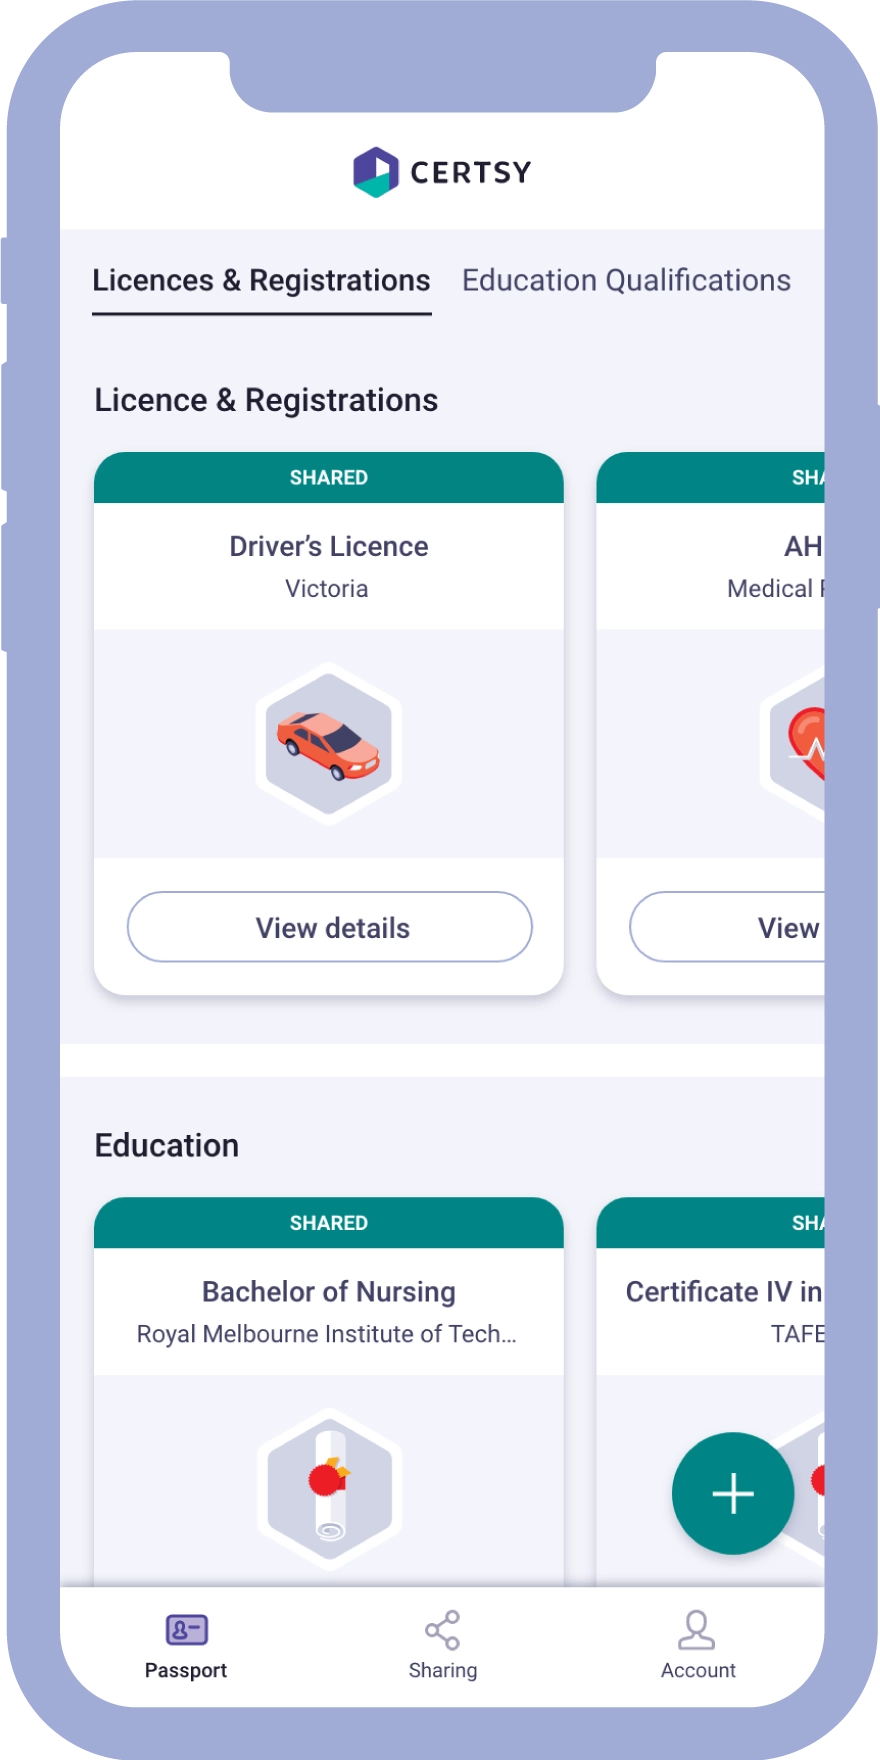 Screenshot of the Certsy app showing several verified credentials